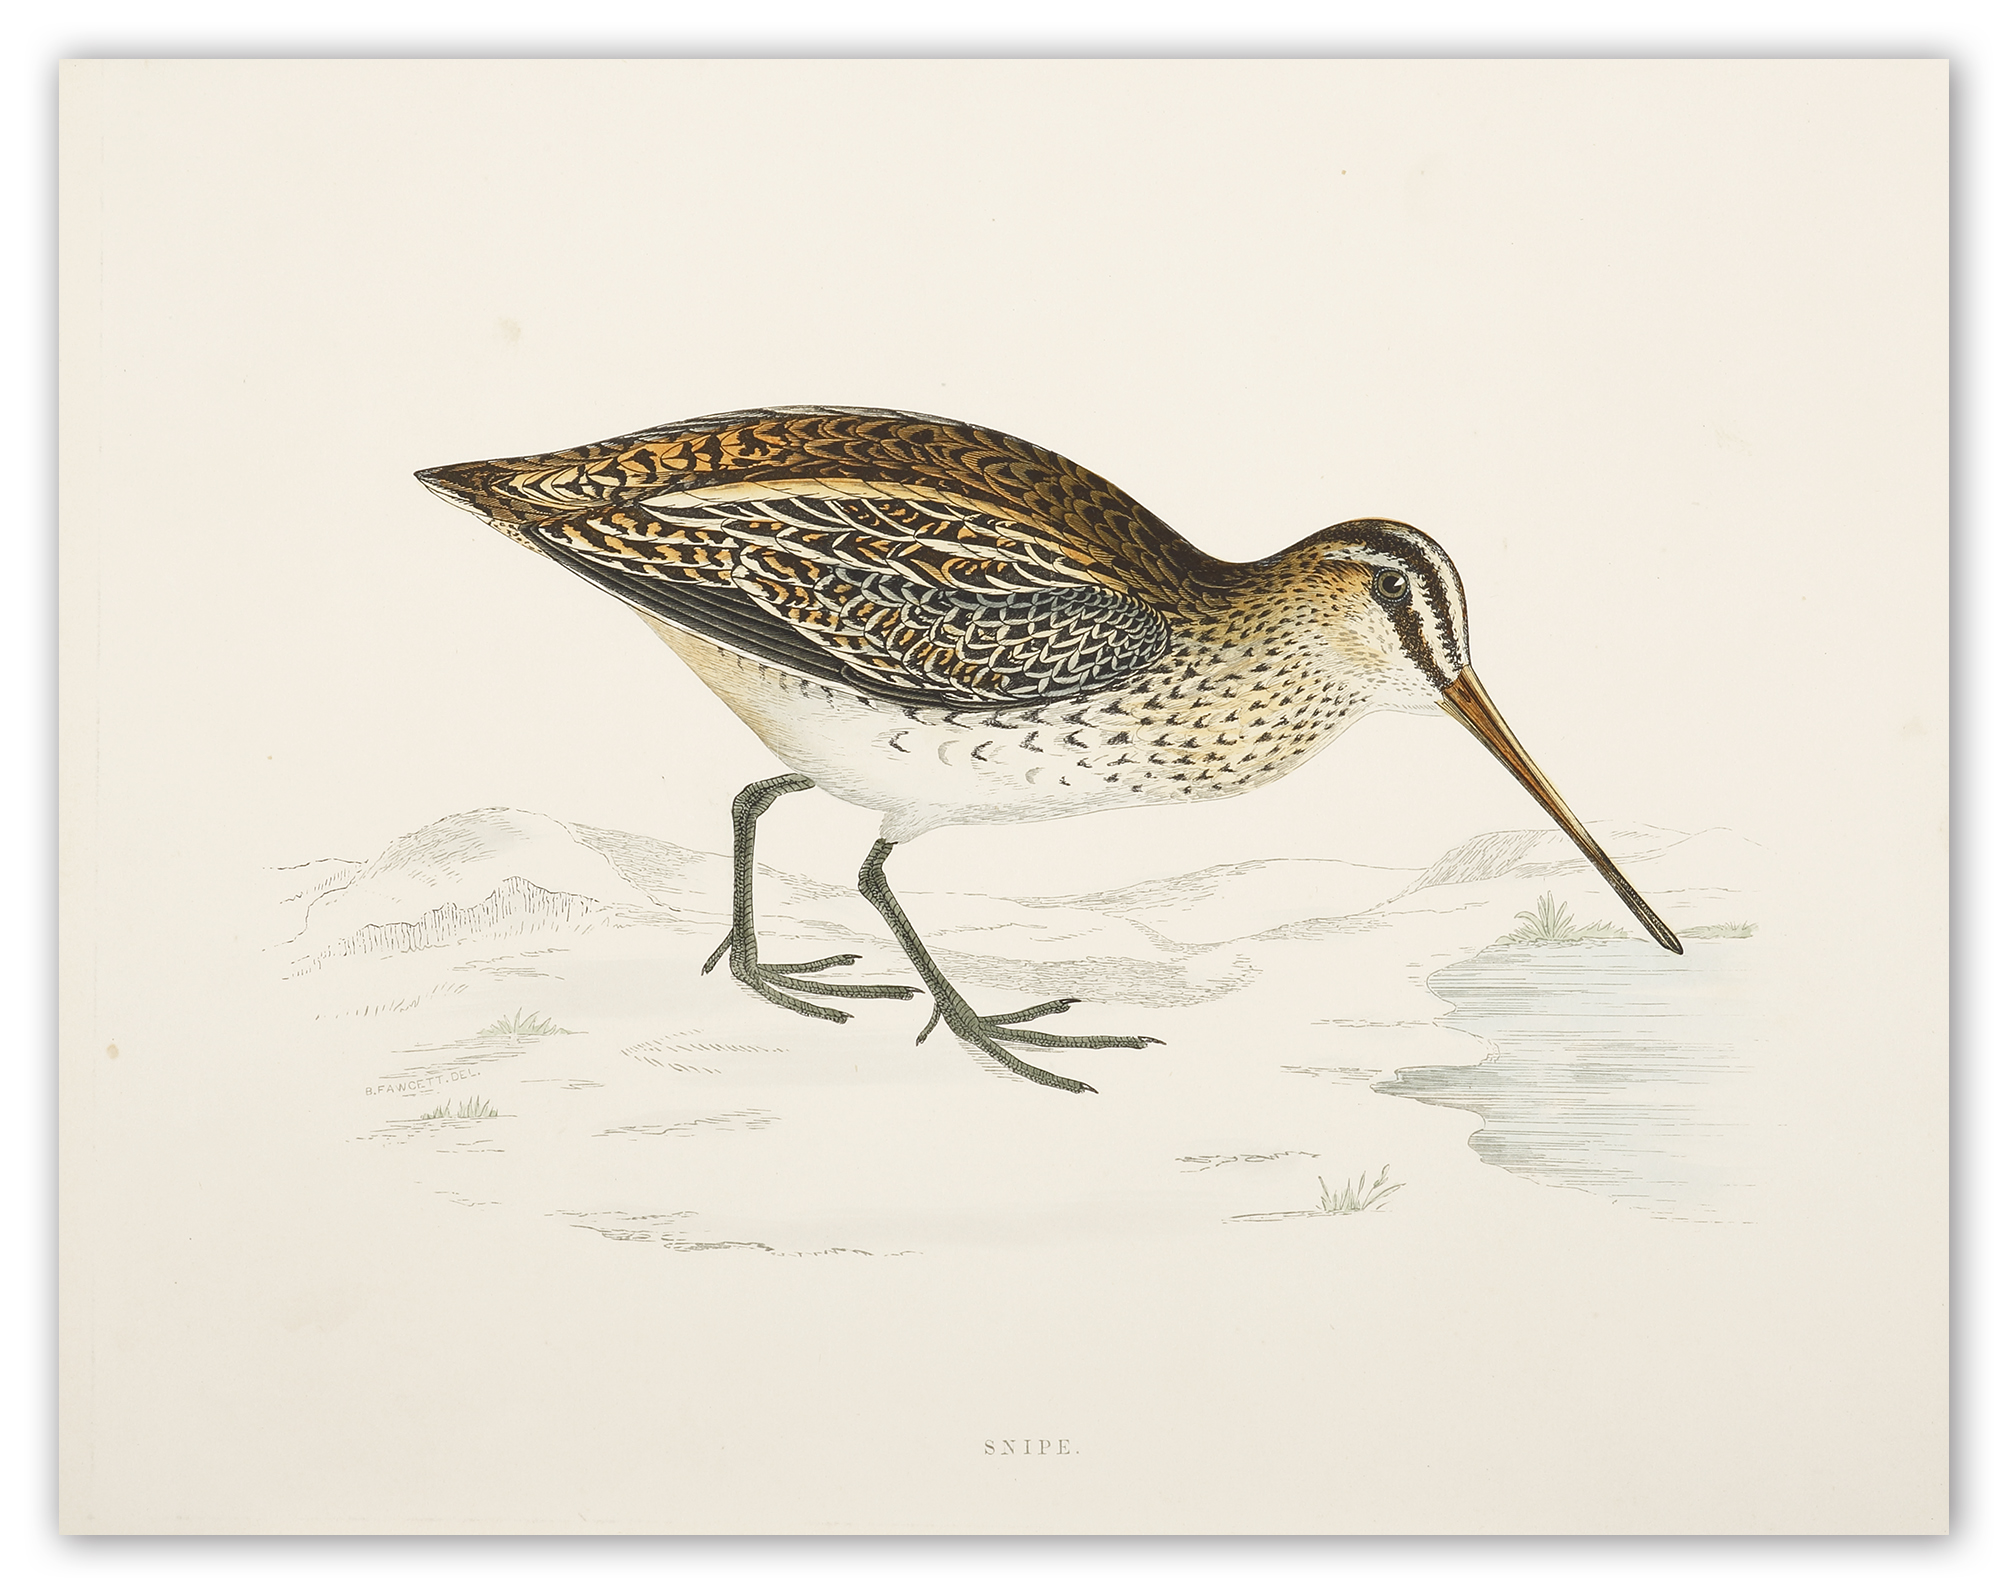 Snipe - Antique Print from 1855